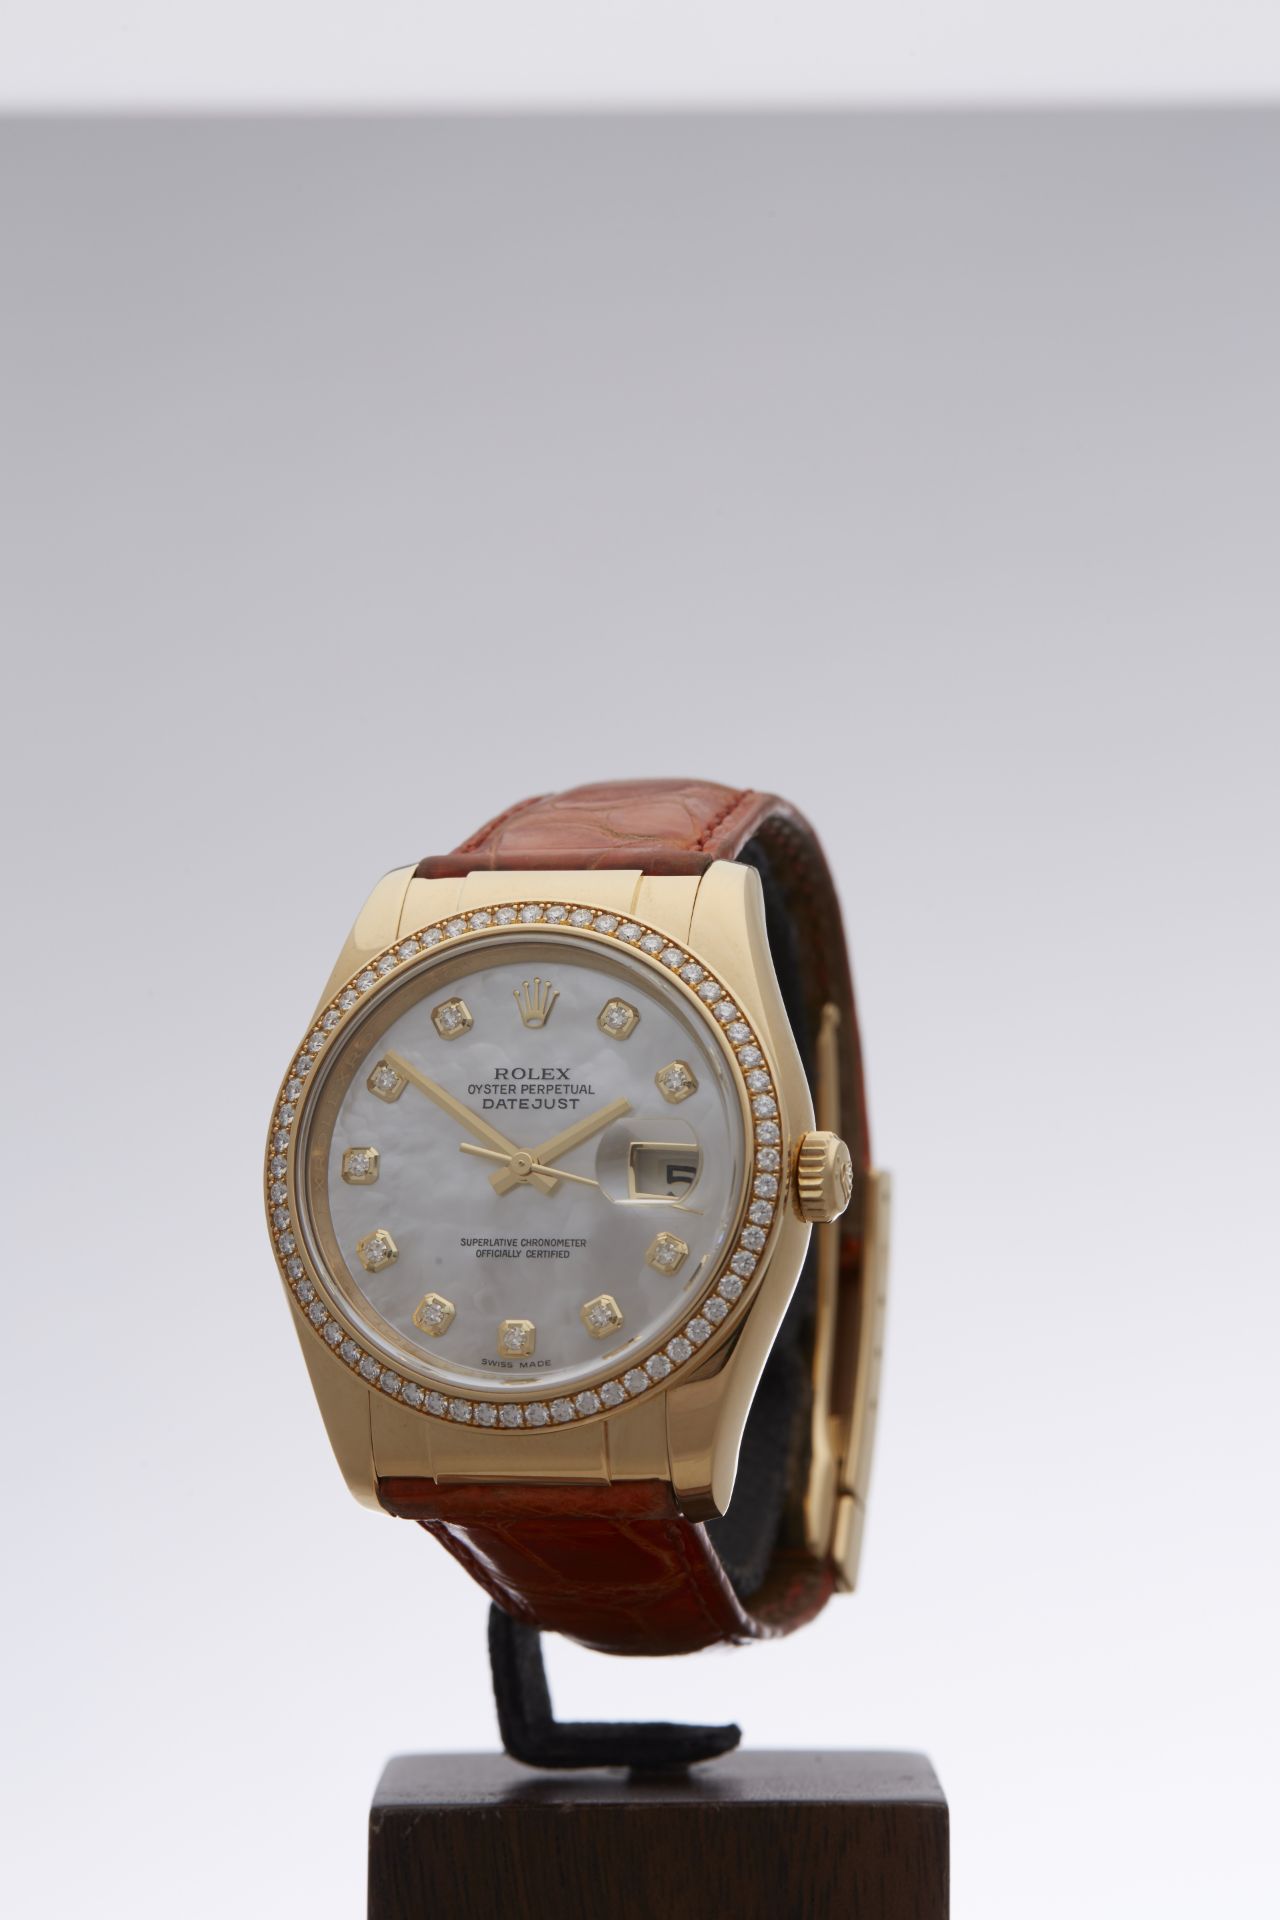 Rolex Datejust 36mm 18k Yellow Gold 116188 - Image 11 of 17